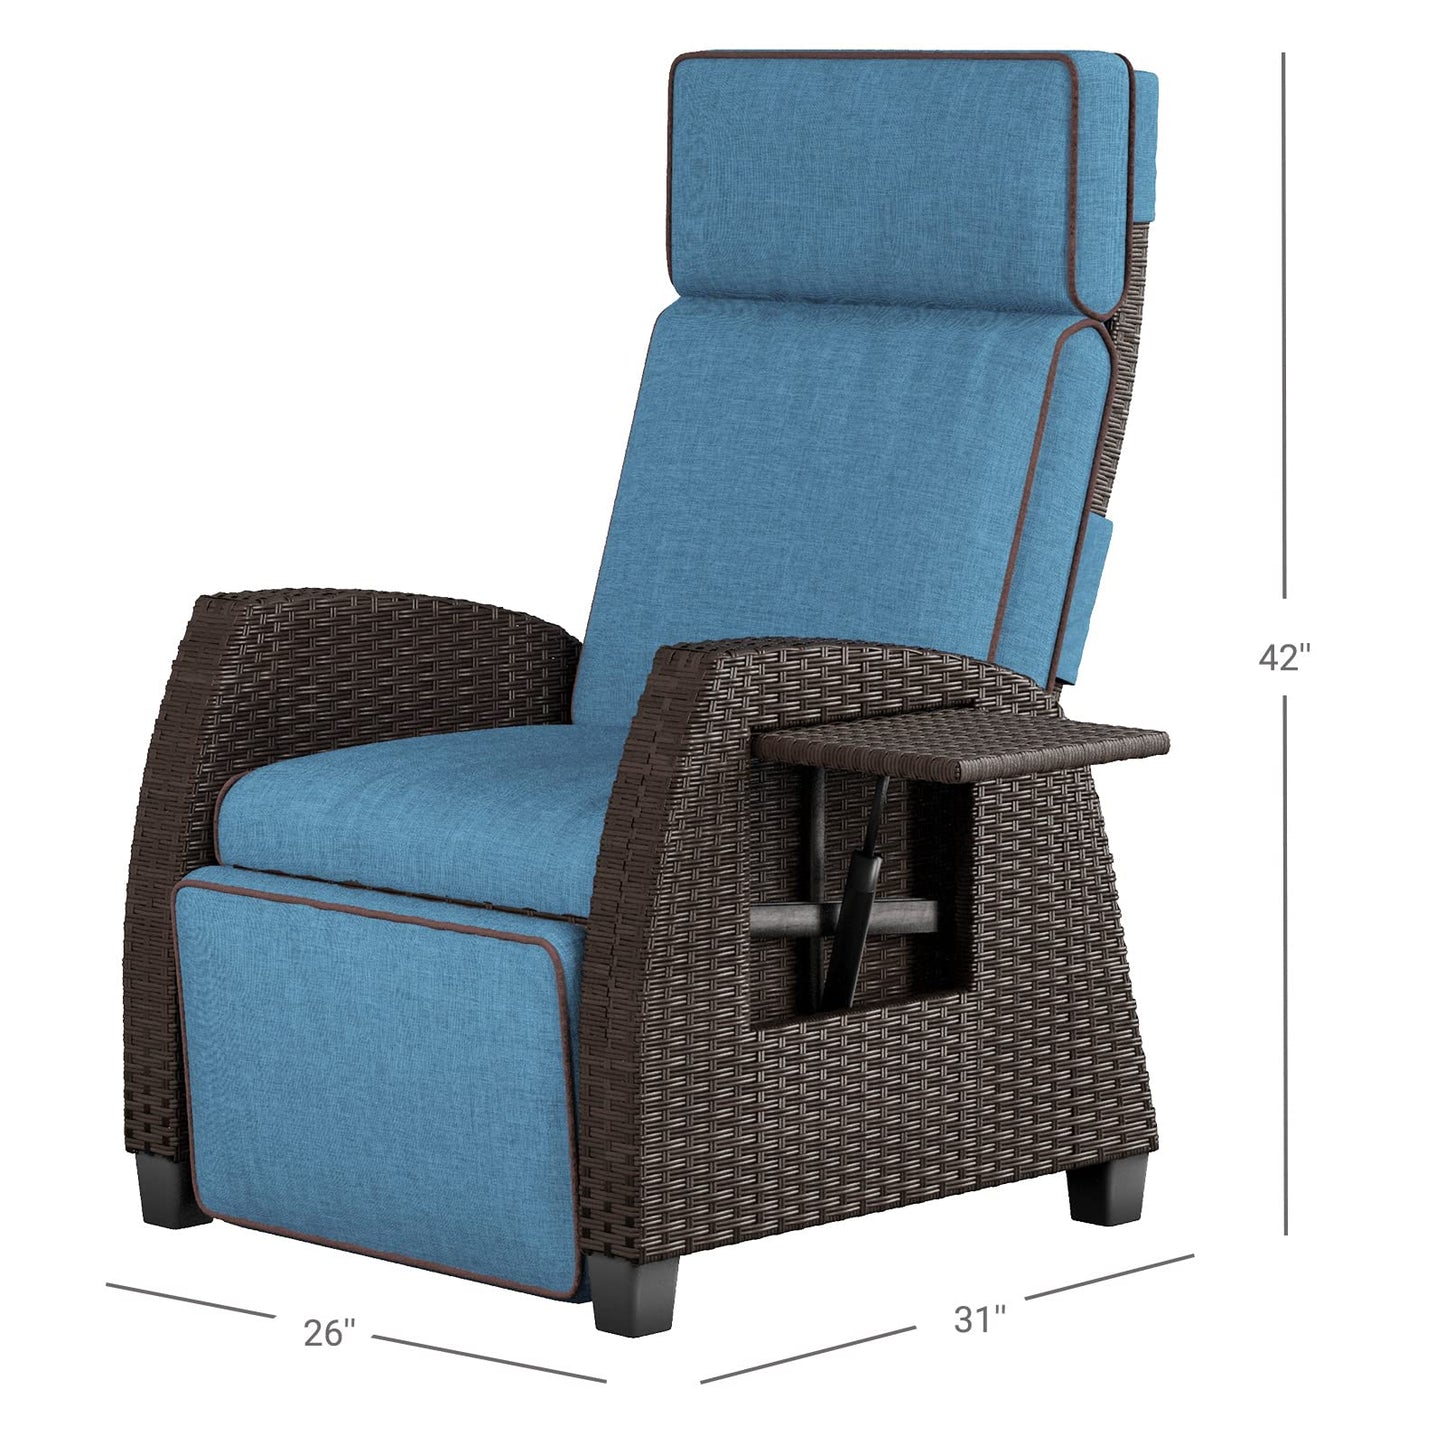 Grand patio Indoor & Outdoor Moor Recliner PE Wicker with Flip Table Push Back Reclining Lounge Chair, Peacock Blue 1 PCS